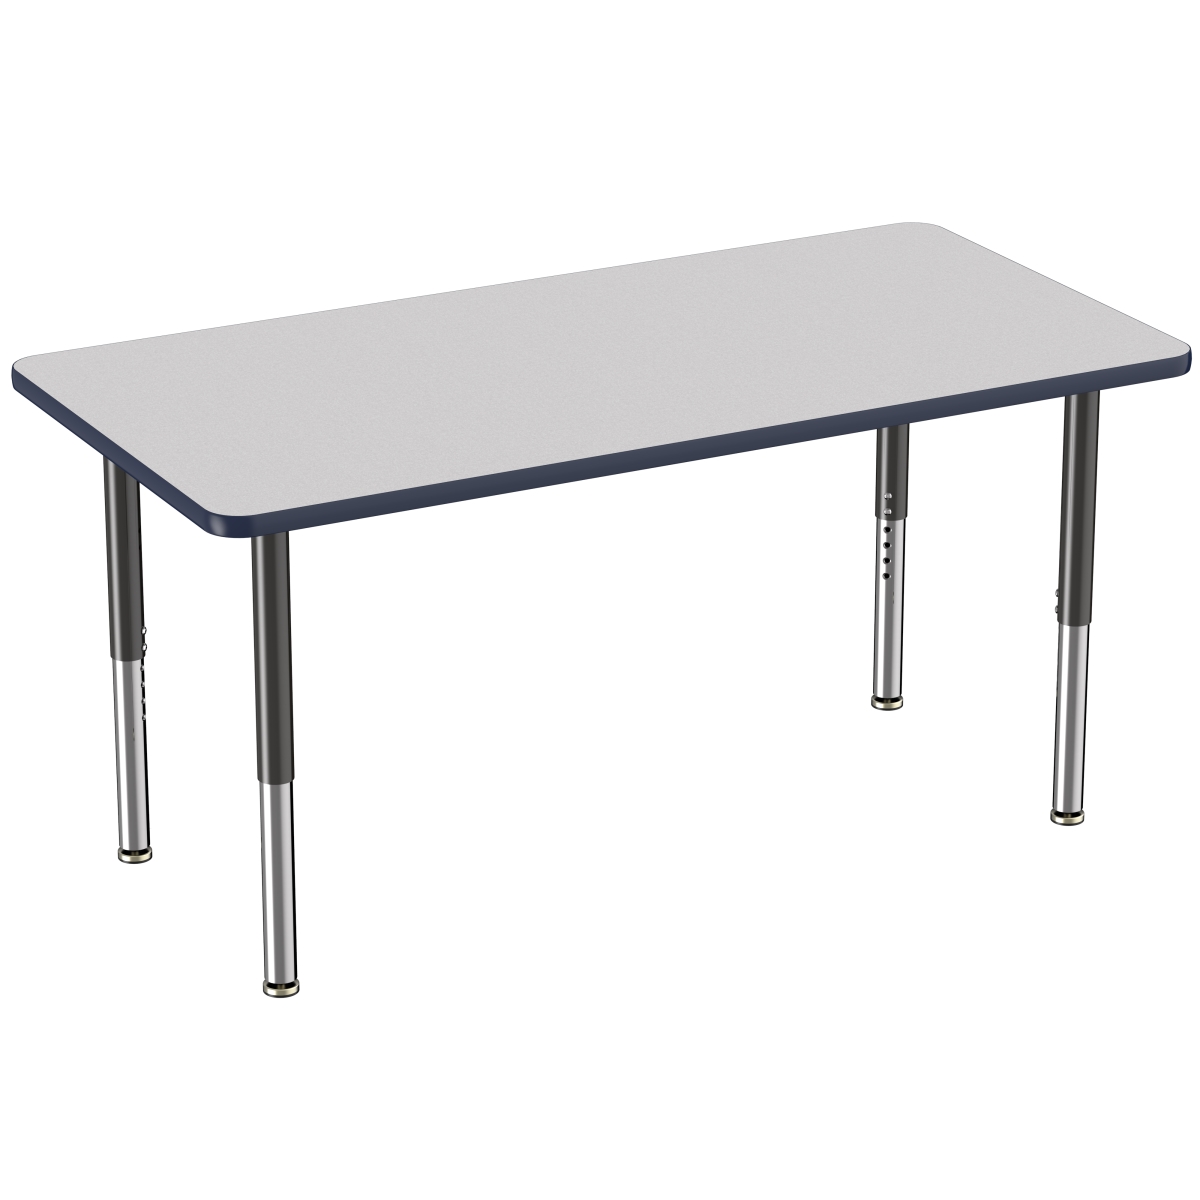 10026-gynv 30 X 60 In. Rectangle T-mold Adjustable Activity Table With Super Leg - Grey & Navy